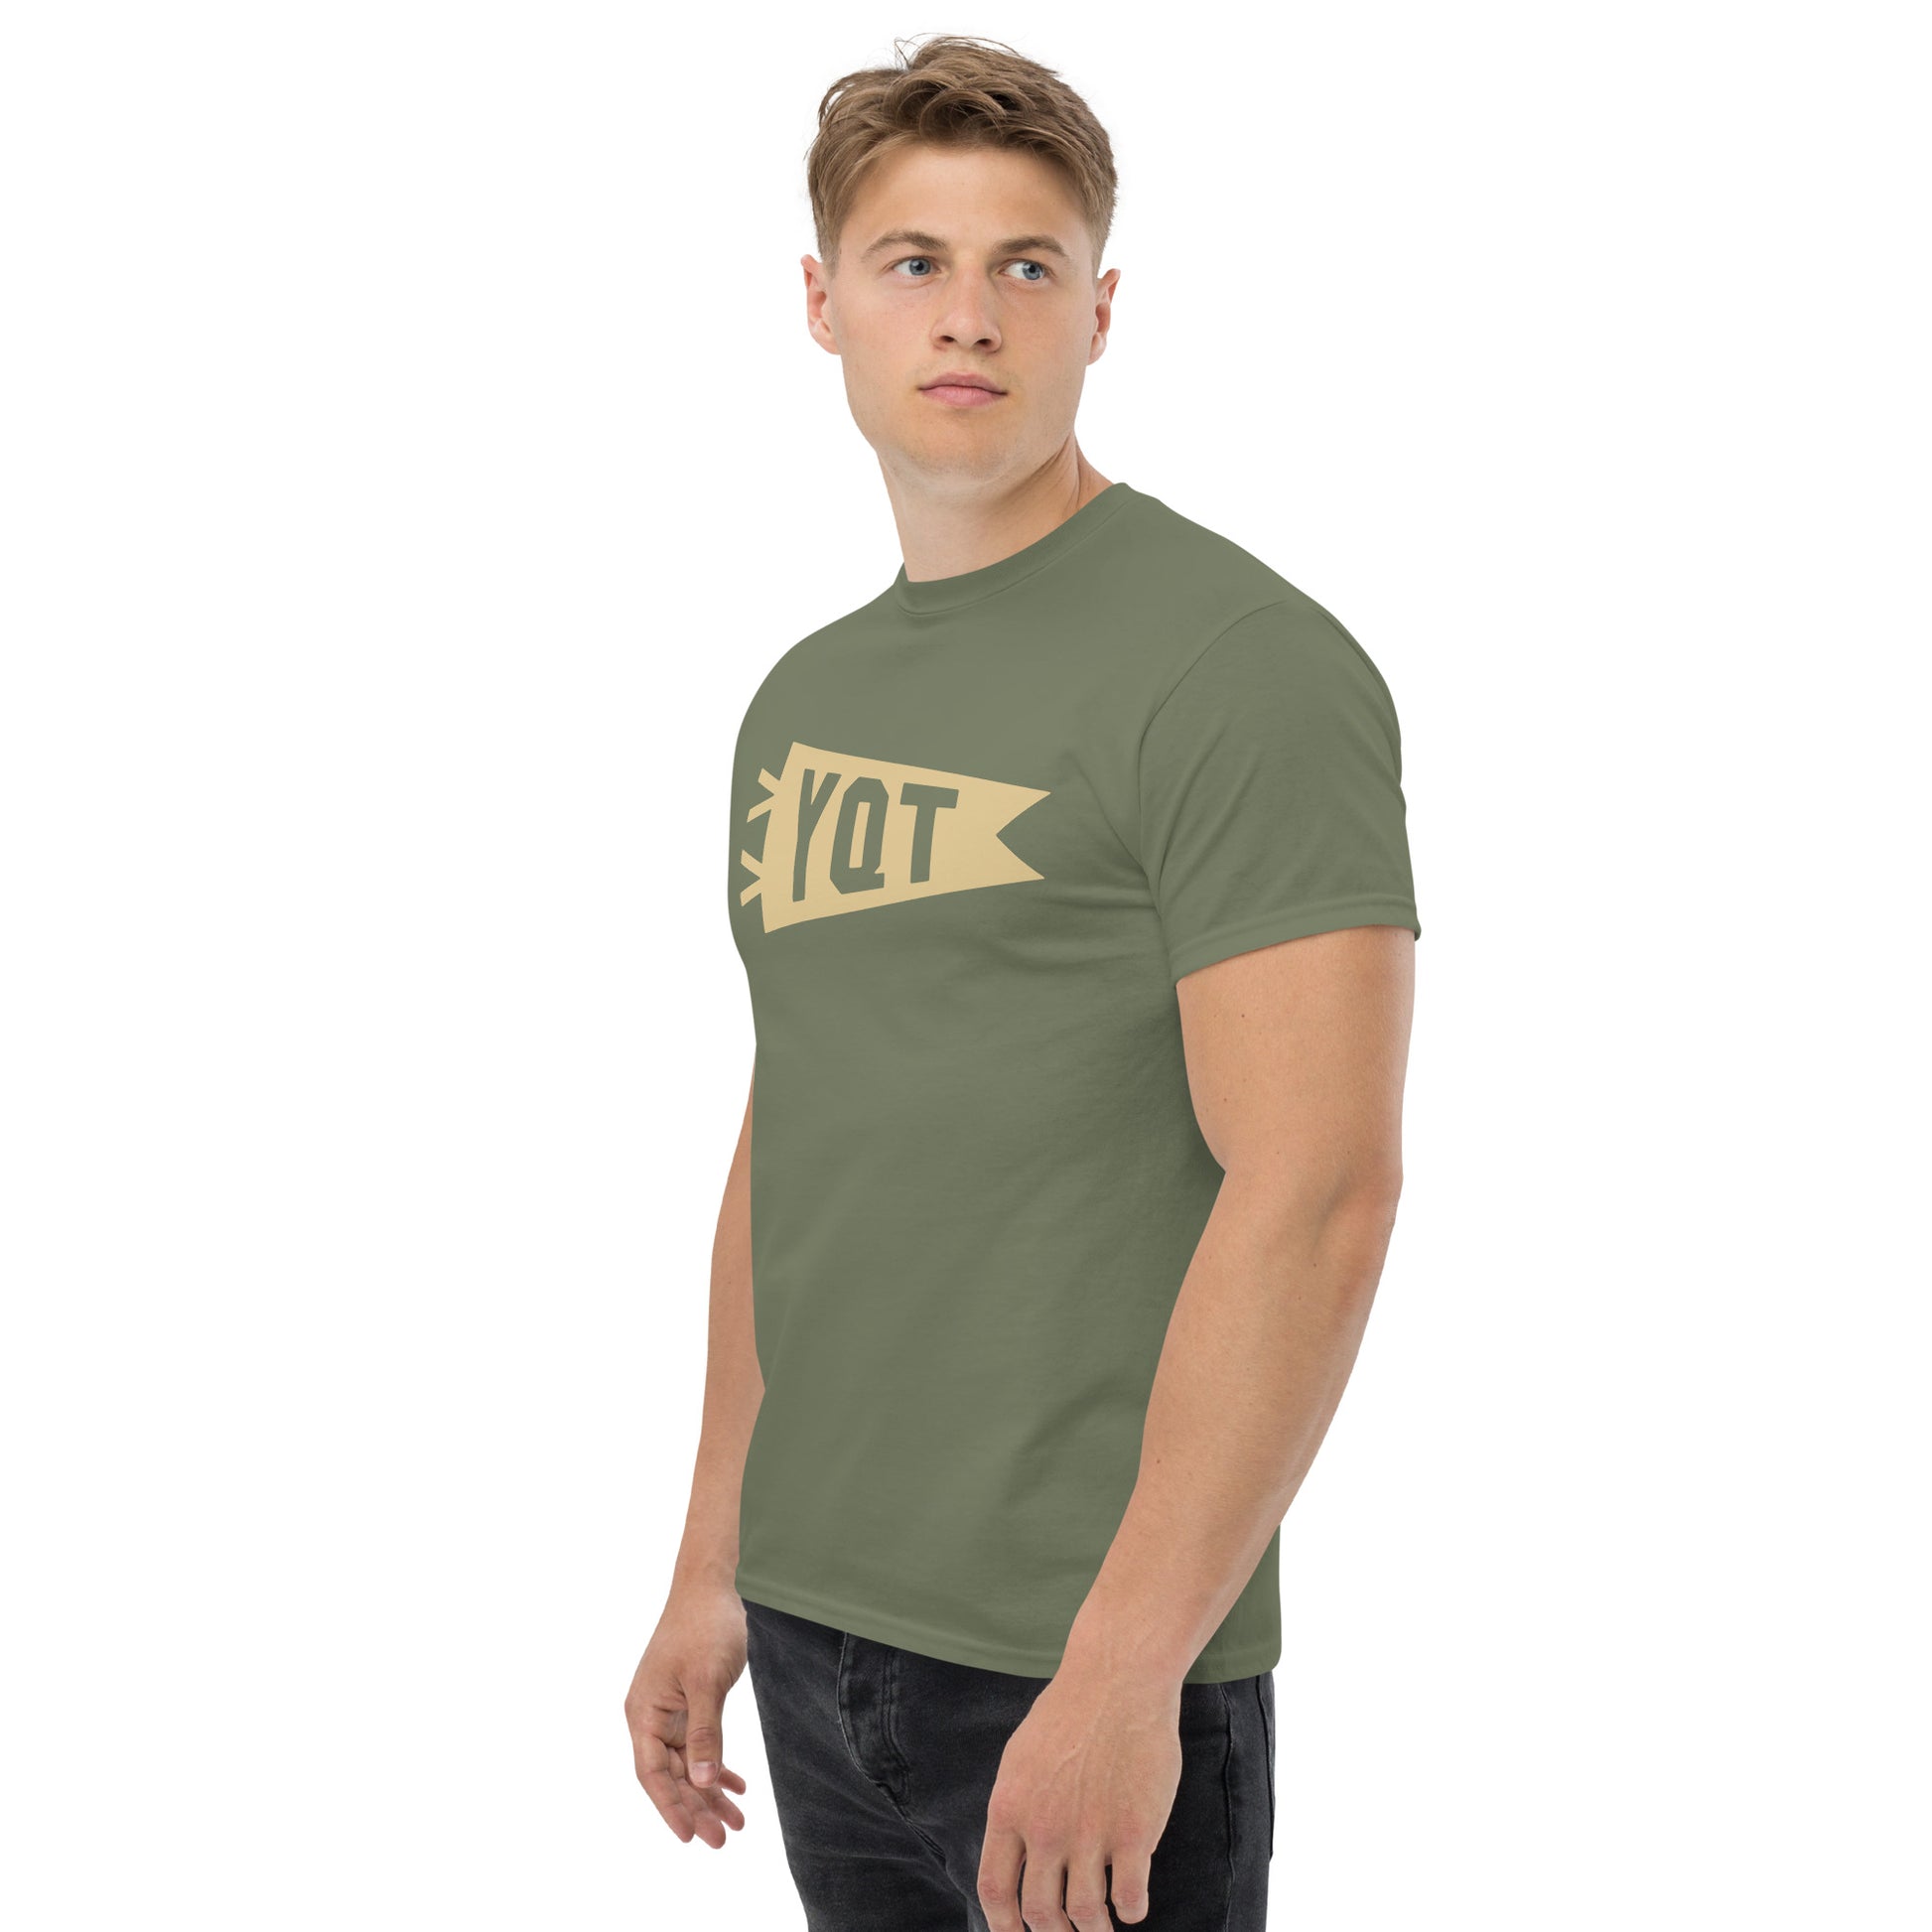 Airport Code Men's T-Shirt - Brown Graphic • YQT Thunder Bay • YHM Designs - Image 05